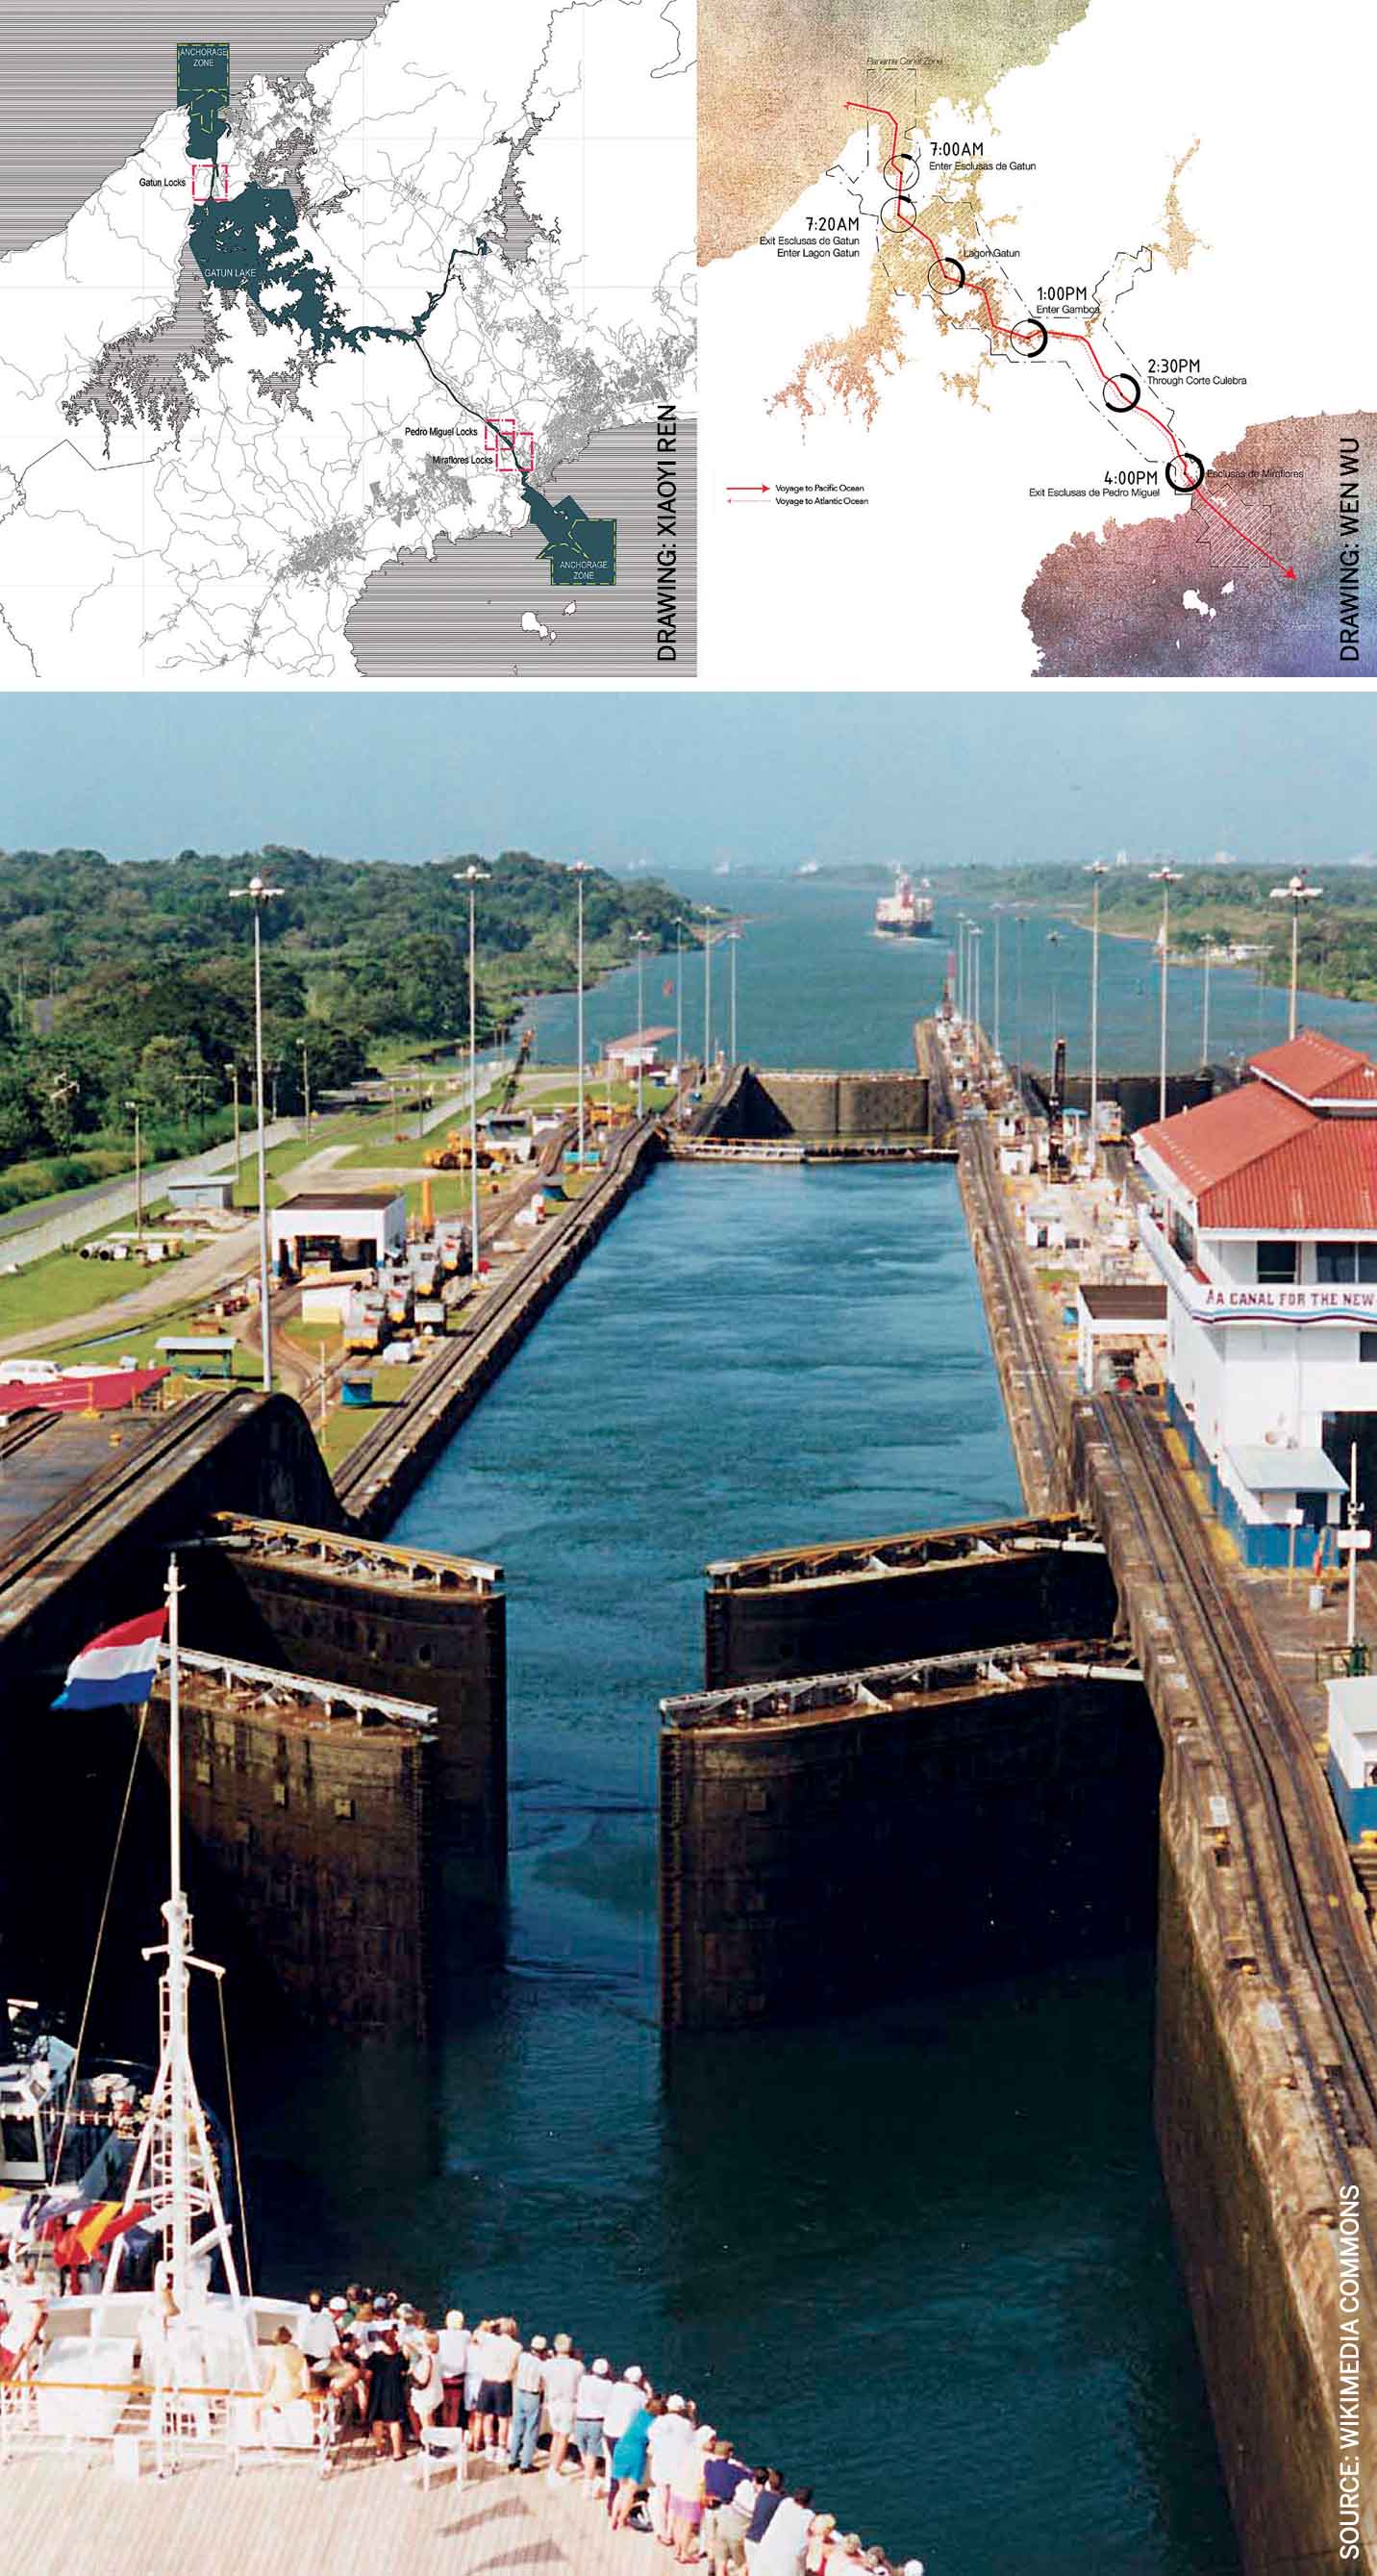 panama-canal-rereading-engineered-mega-landscape-context-timeline-ship-route-through-from atlantic-pacific-gates-one-locks-open-let-ship-through